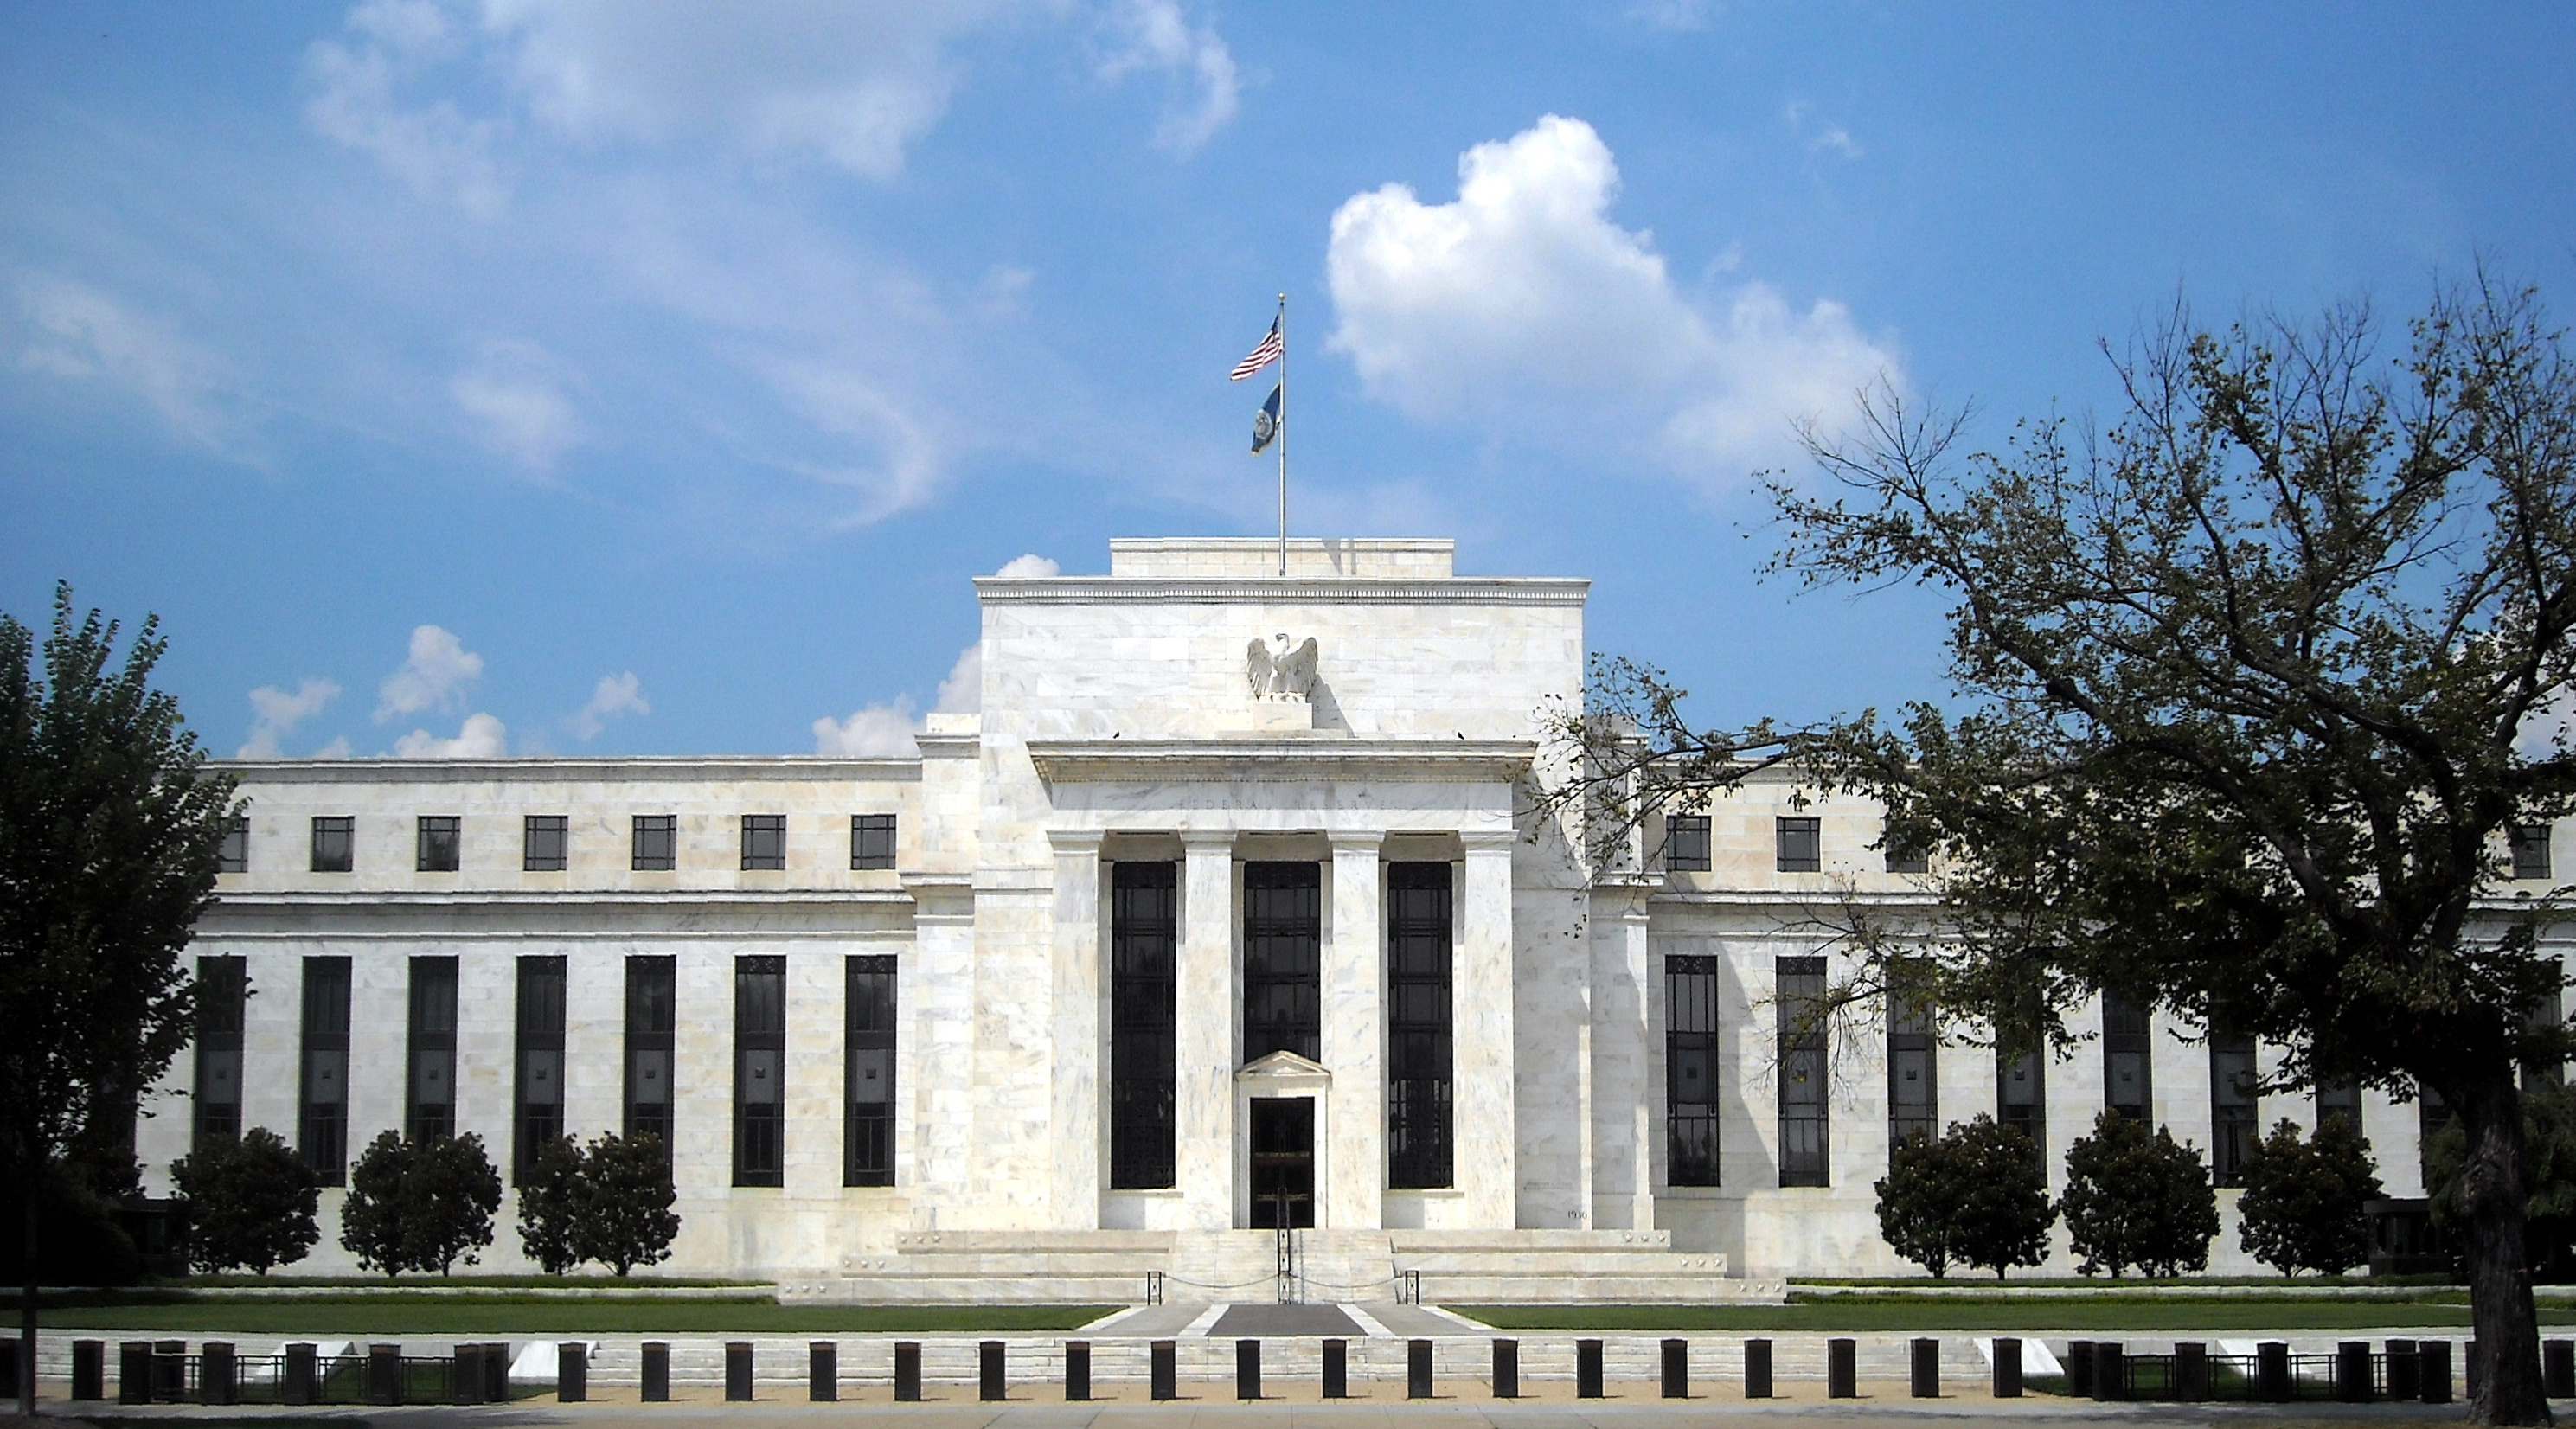 WRAPUP 1-Fed likely to keep interest rates on hold, focus on balance sheet